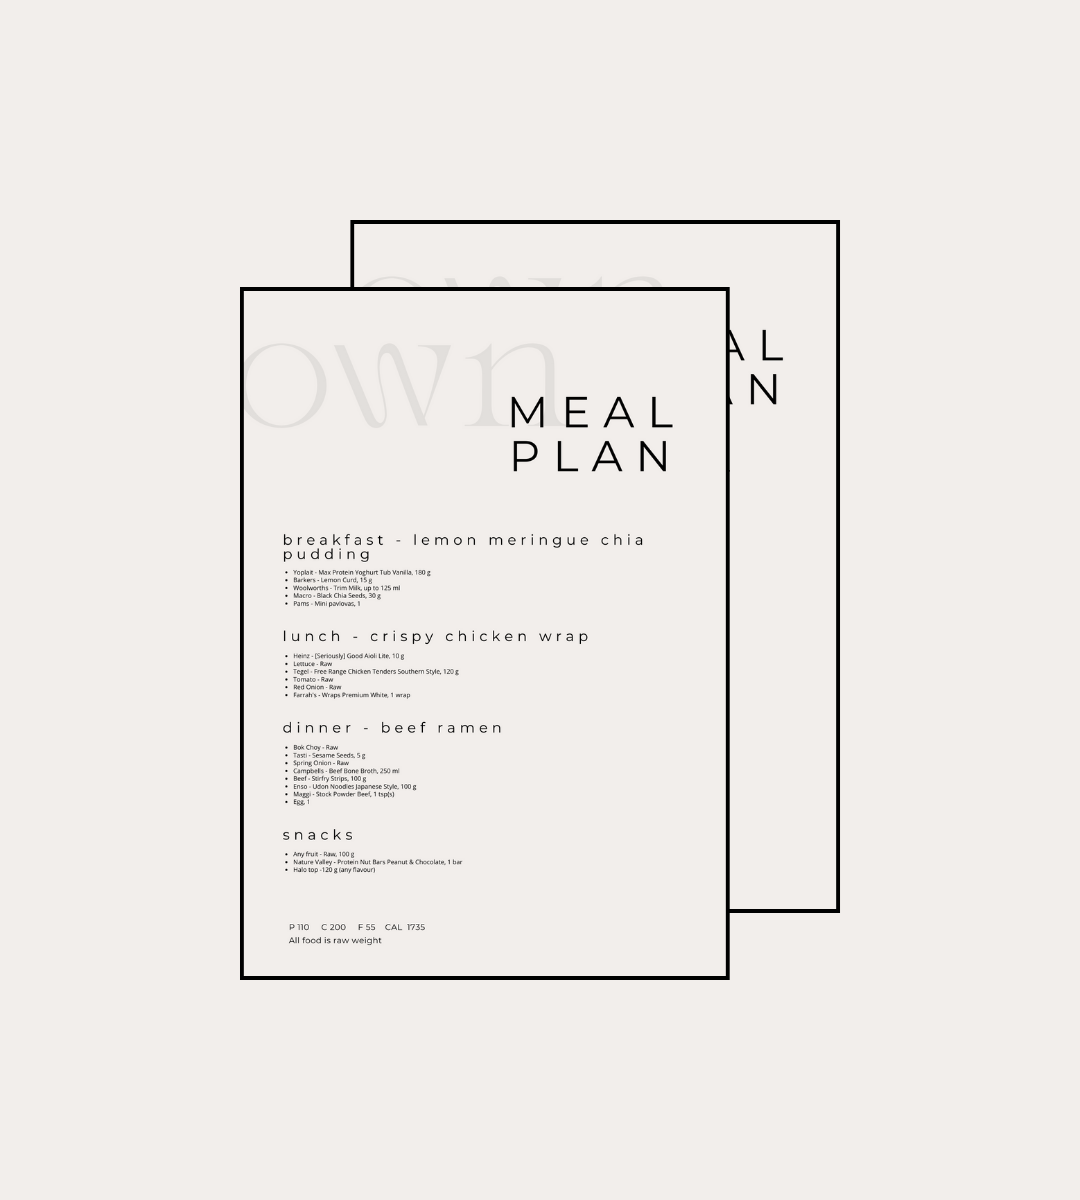 The image shows two overlapping meal plan sheets written by a nutritionist, with a minimalist design and white background. The title "MEAL PLAN" is at the top. The plan includes four sections: "breakfast - lemon meringue chia pudding," "lunch - crispy chicken wrap," "dinner - beef ramen," and "snacks," each listing ingredients and quantities. Nutritional info at the bottom reads: "P 110 C 200 F 55 CAL 1735" and notes, "All food is raw weight."